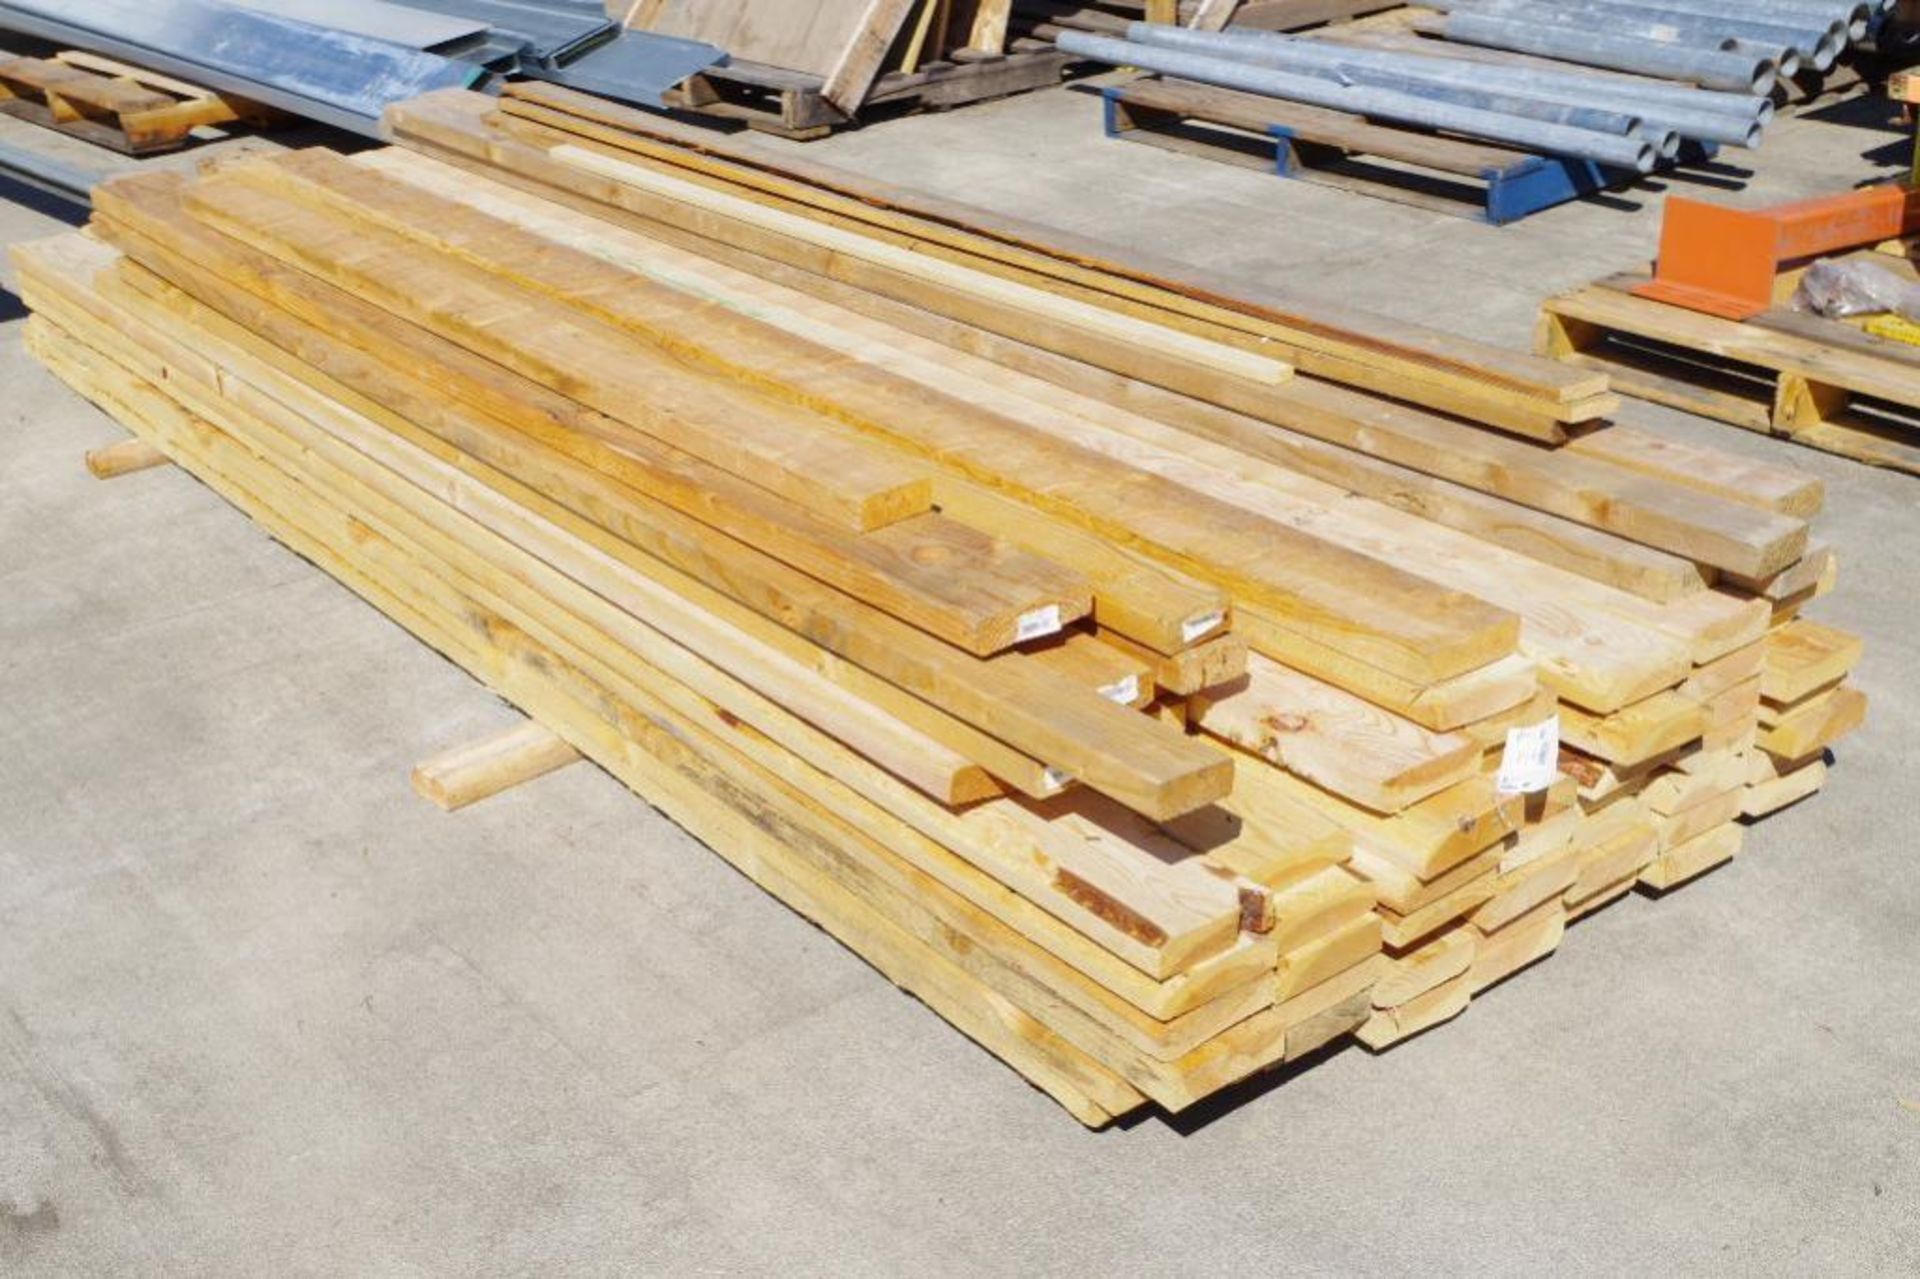 [QTY] Dimensional Lumber: Mostly 2x6 x 10'; Some 2x4 x 10' & 2x4 x 8'; Lumber has defects